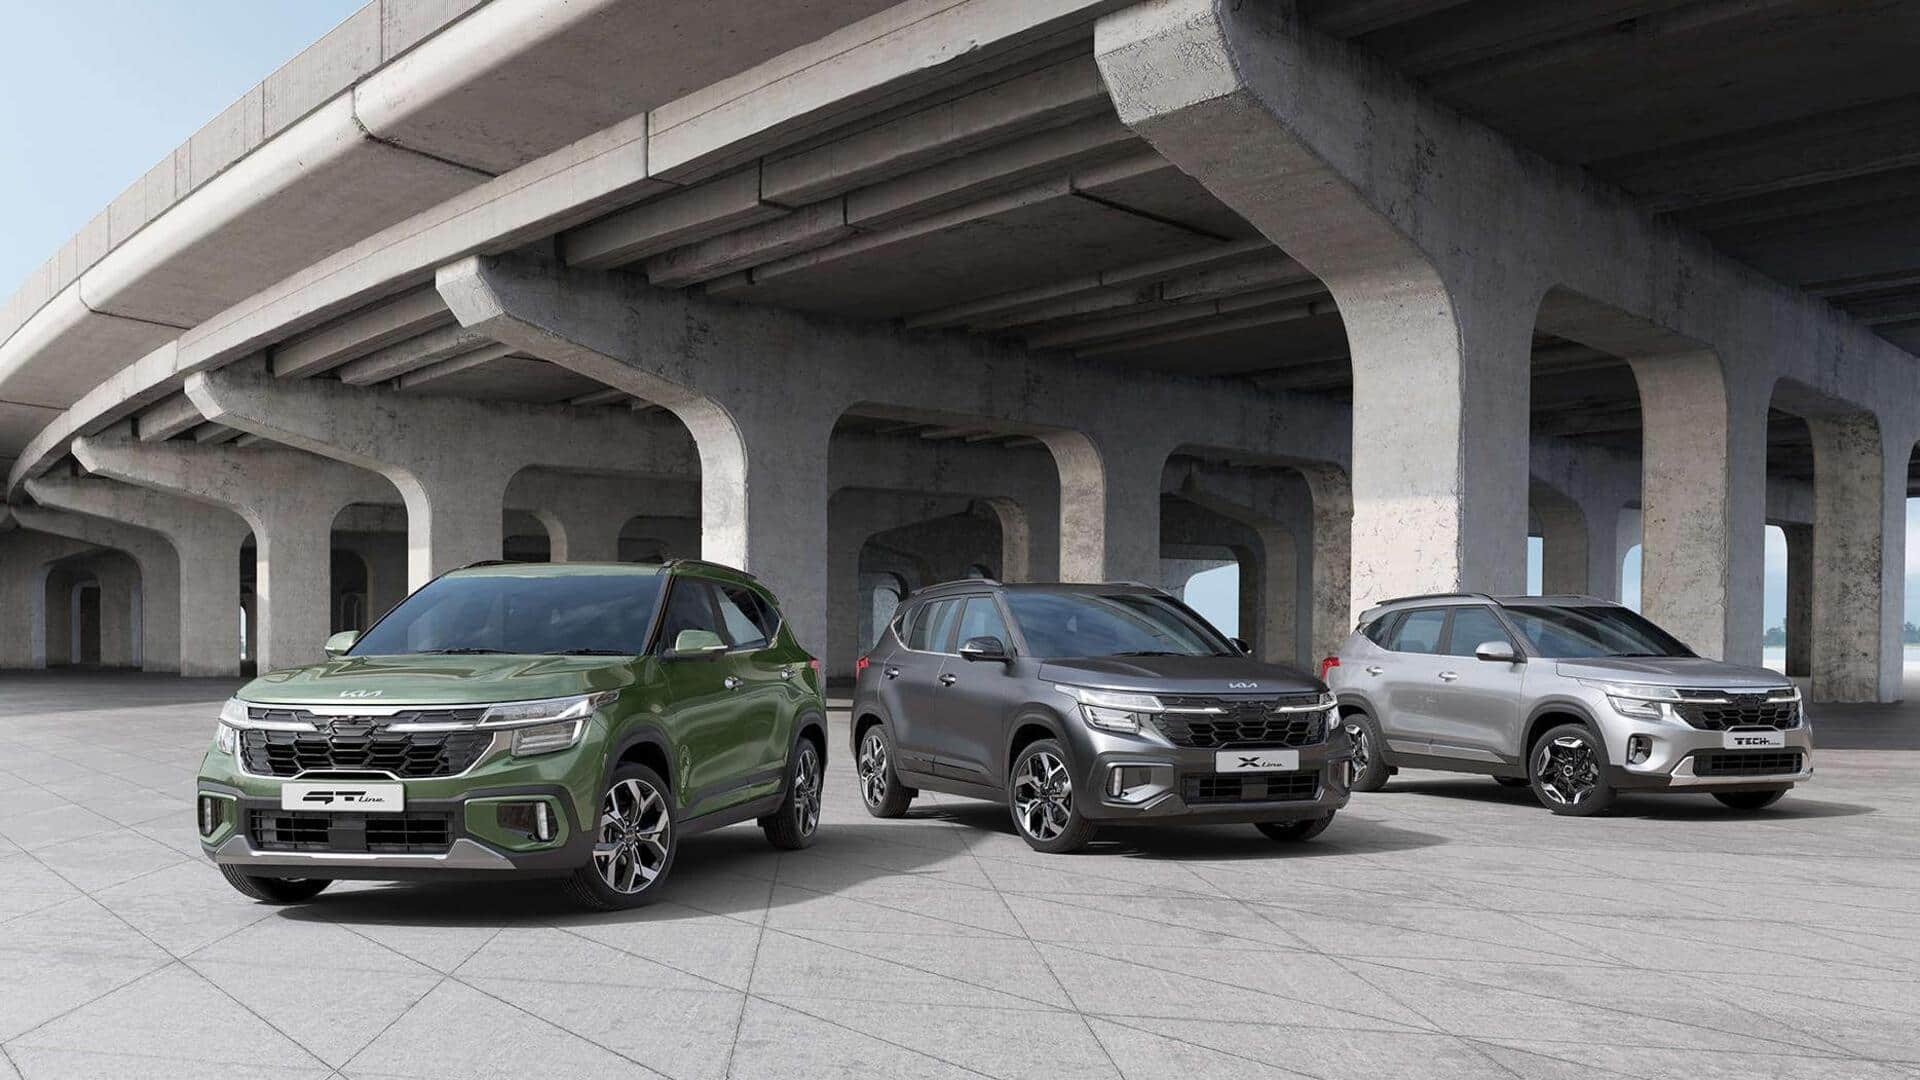 2023 Kia Seltos launched in India at Rs. 10.9 lakh